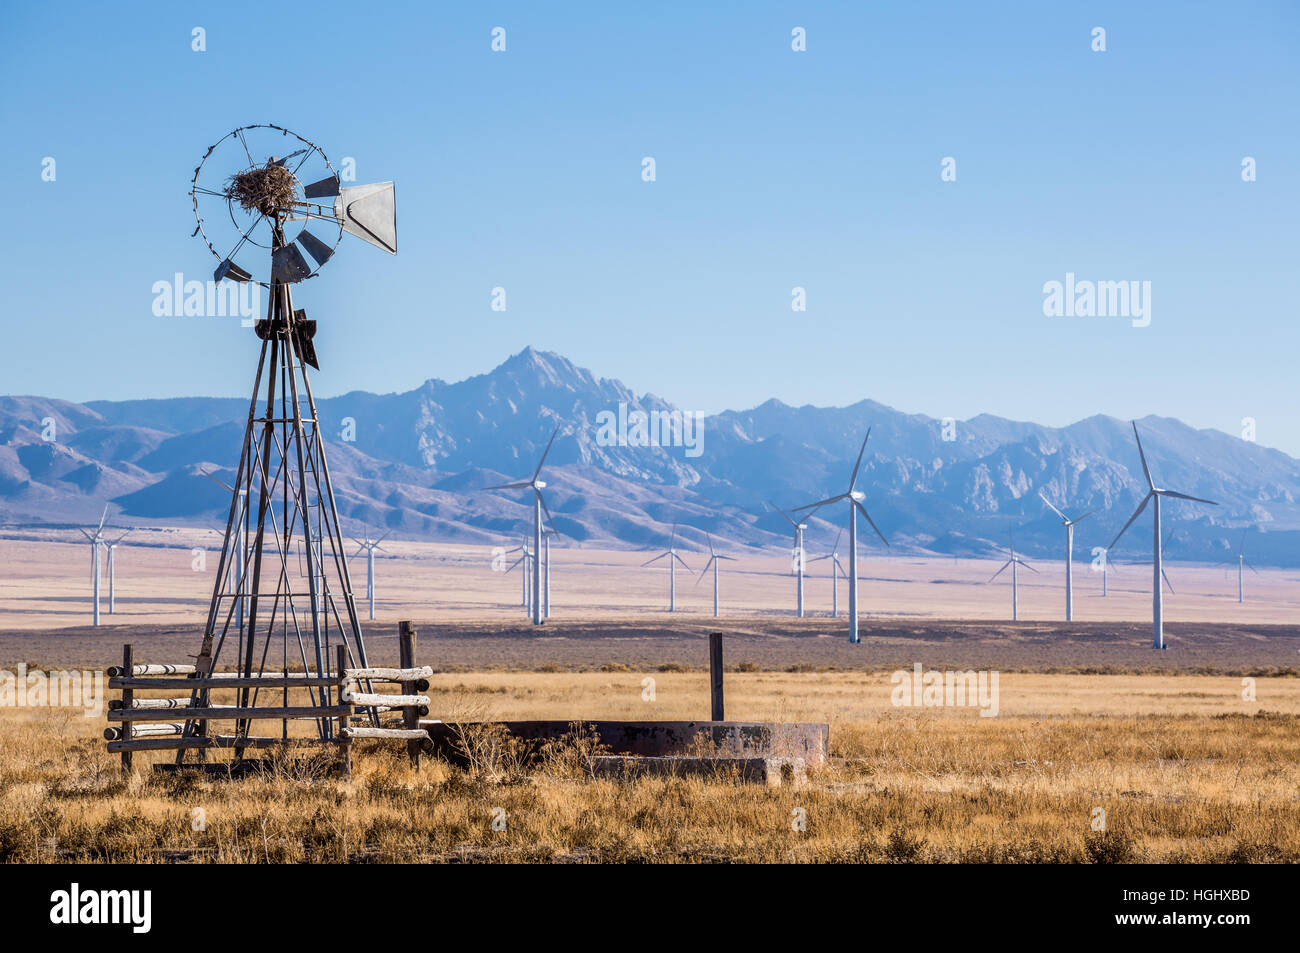 Old, windmill that is falling apart and now has a large bird nest on it rests in front of a large windfarm with 23 visible wind turbines Stock Photo